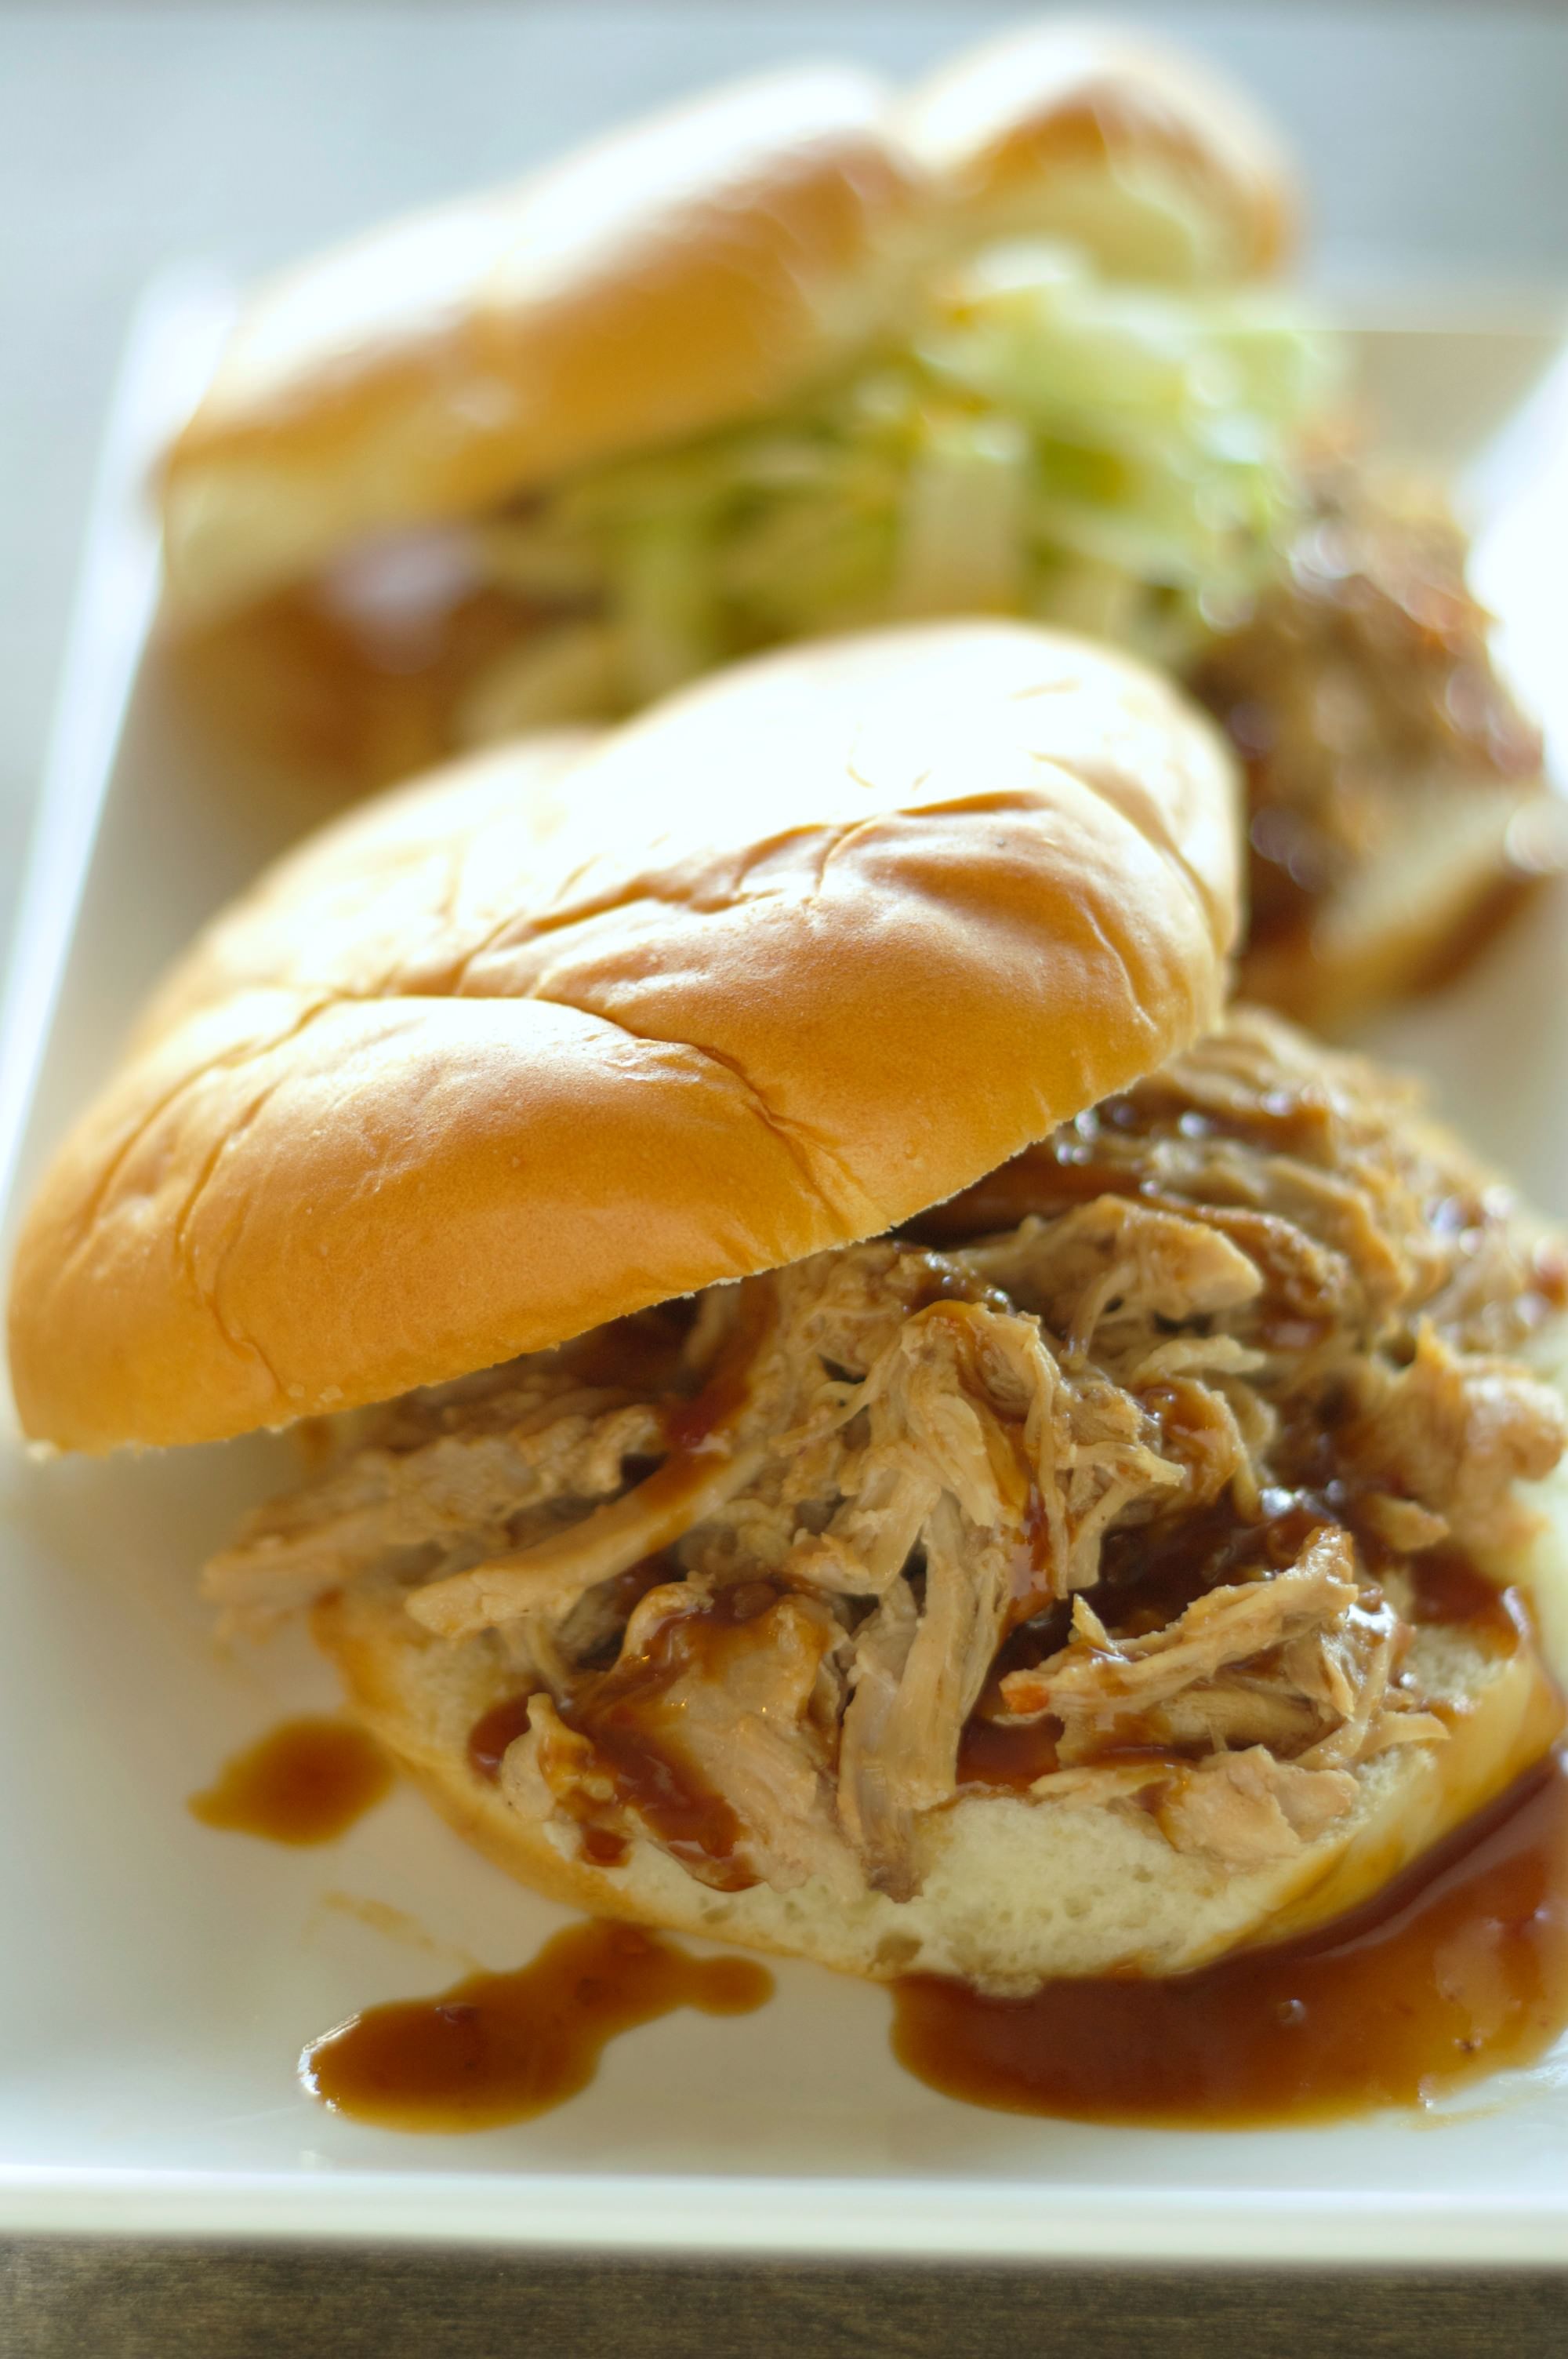 Two Slow Cooker Pulled Pork Sandwiches on buns on a white plate